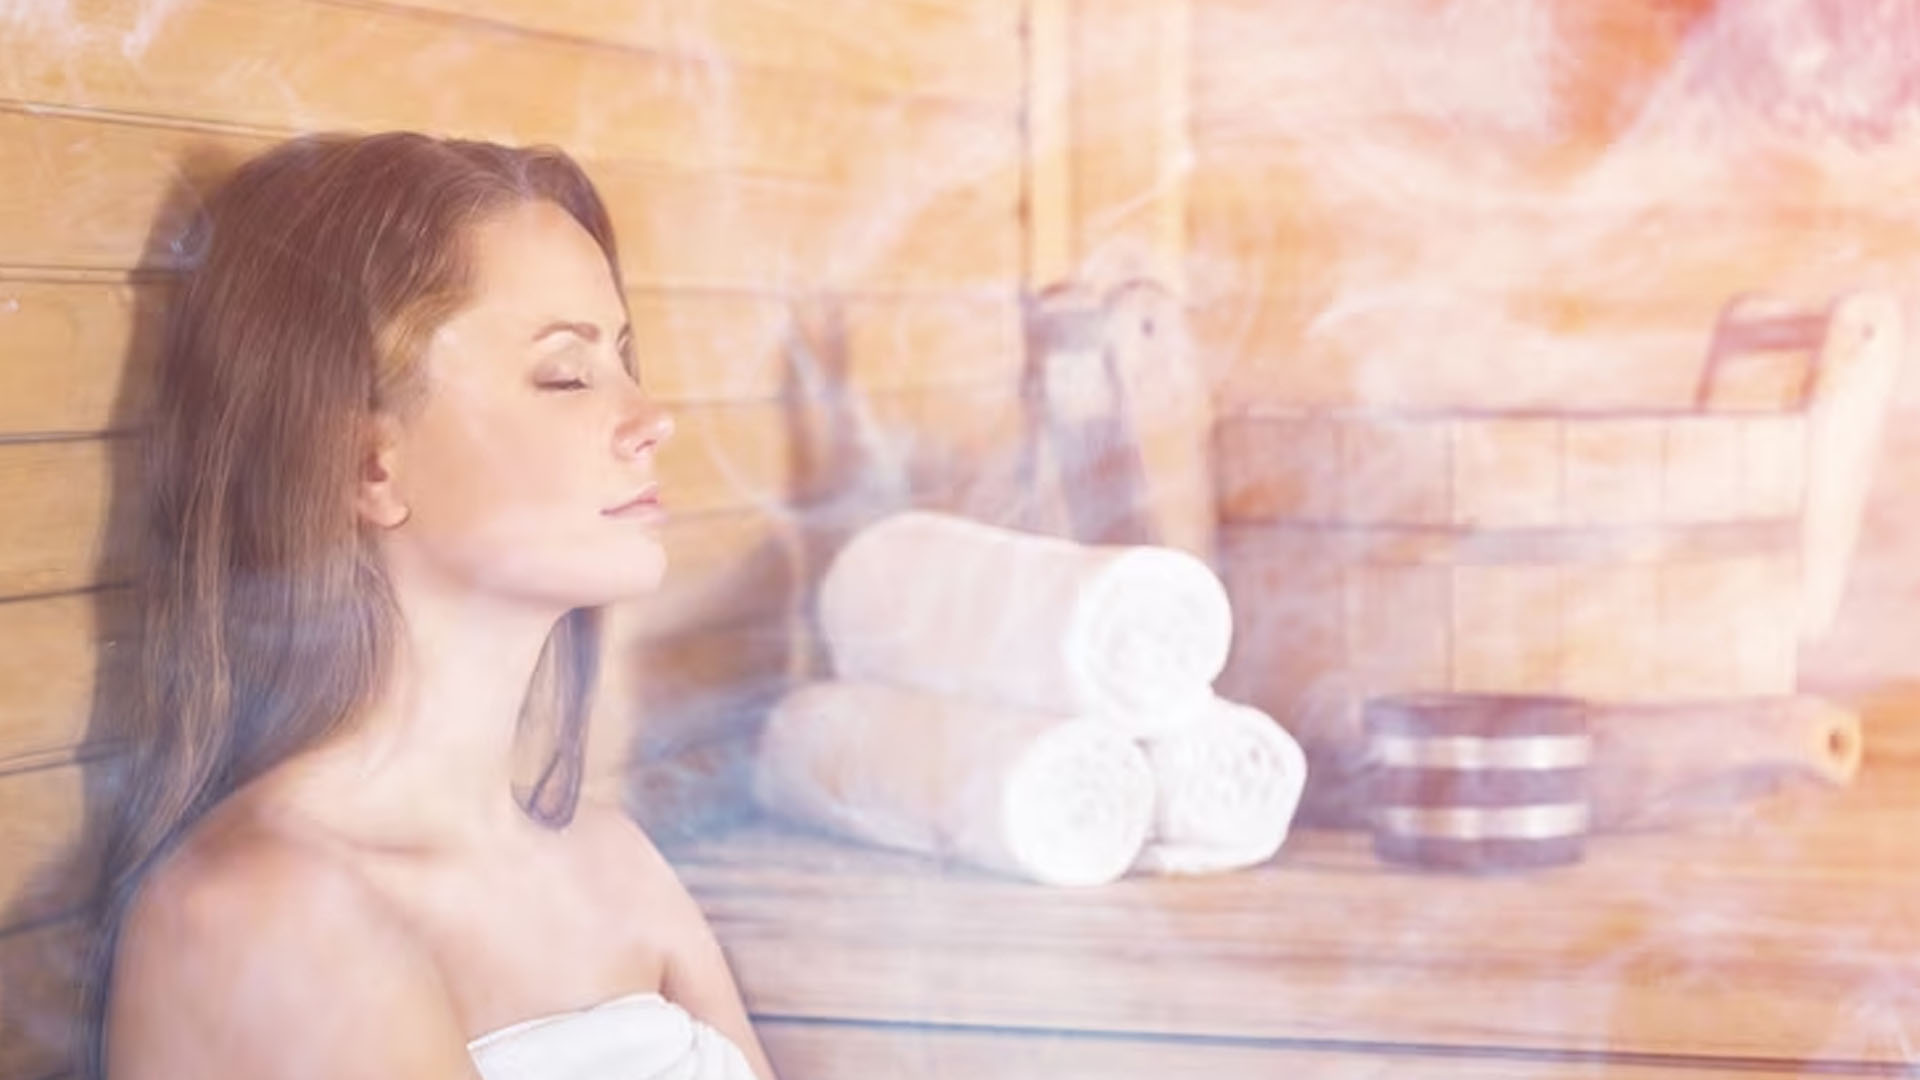 Does Steam Room Have Any Health Benefits?